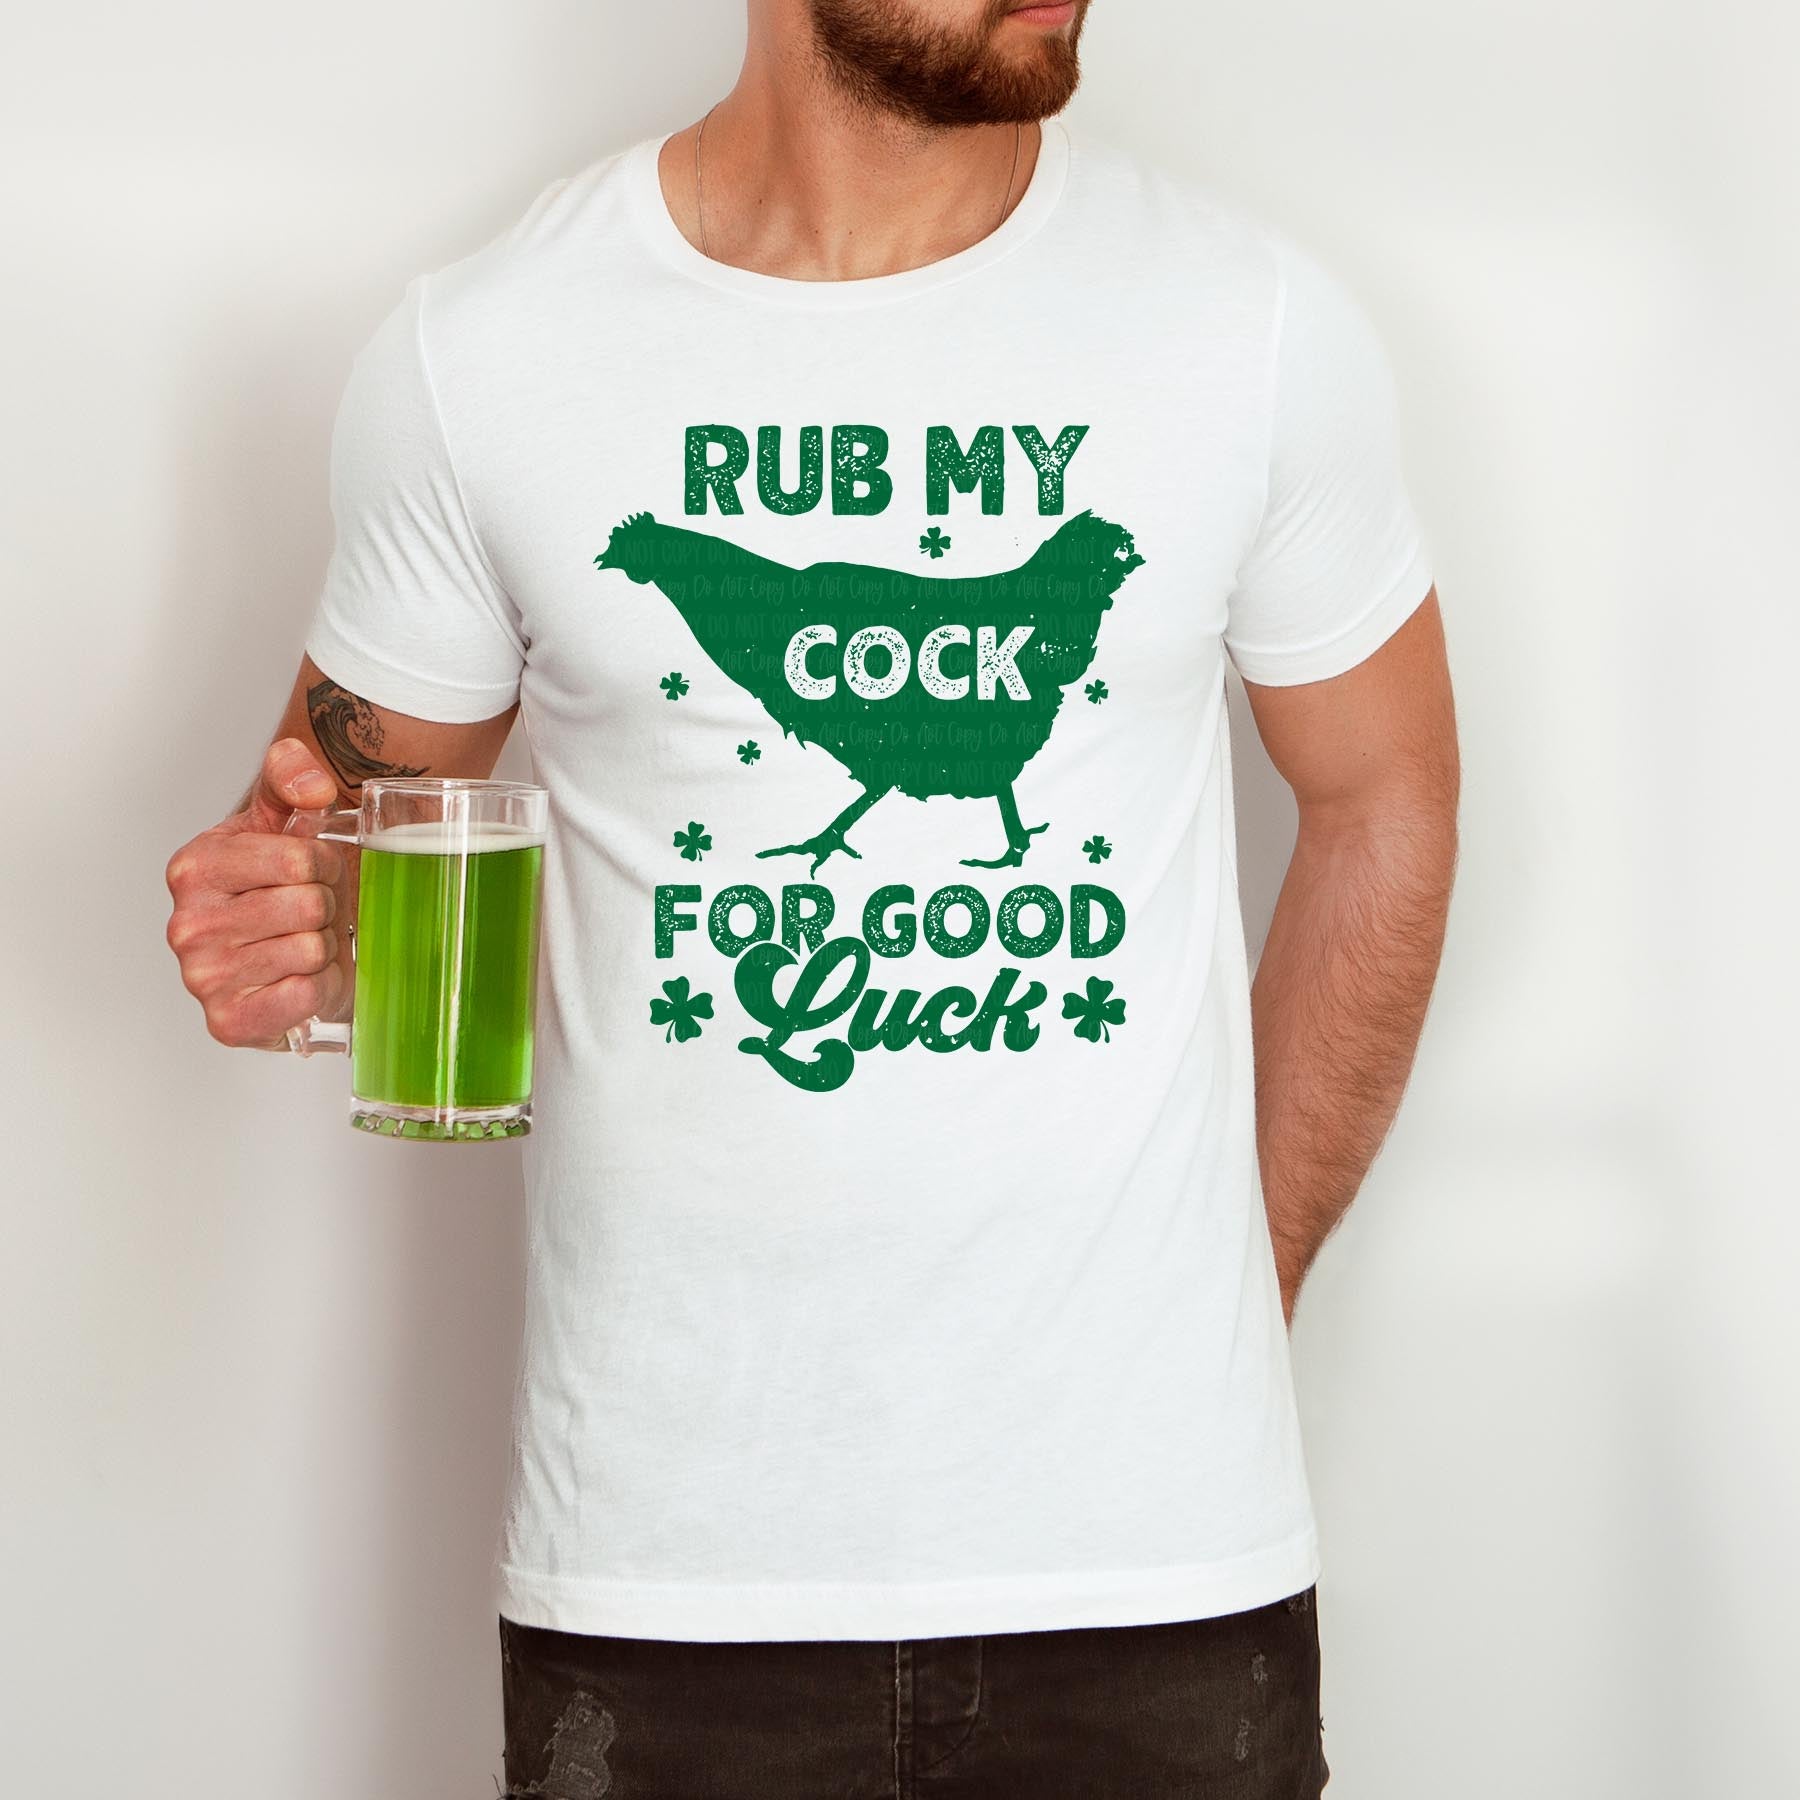 Rub My Cock for Good Luck T-Shirt